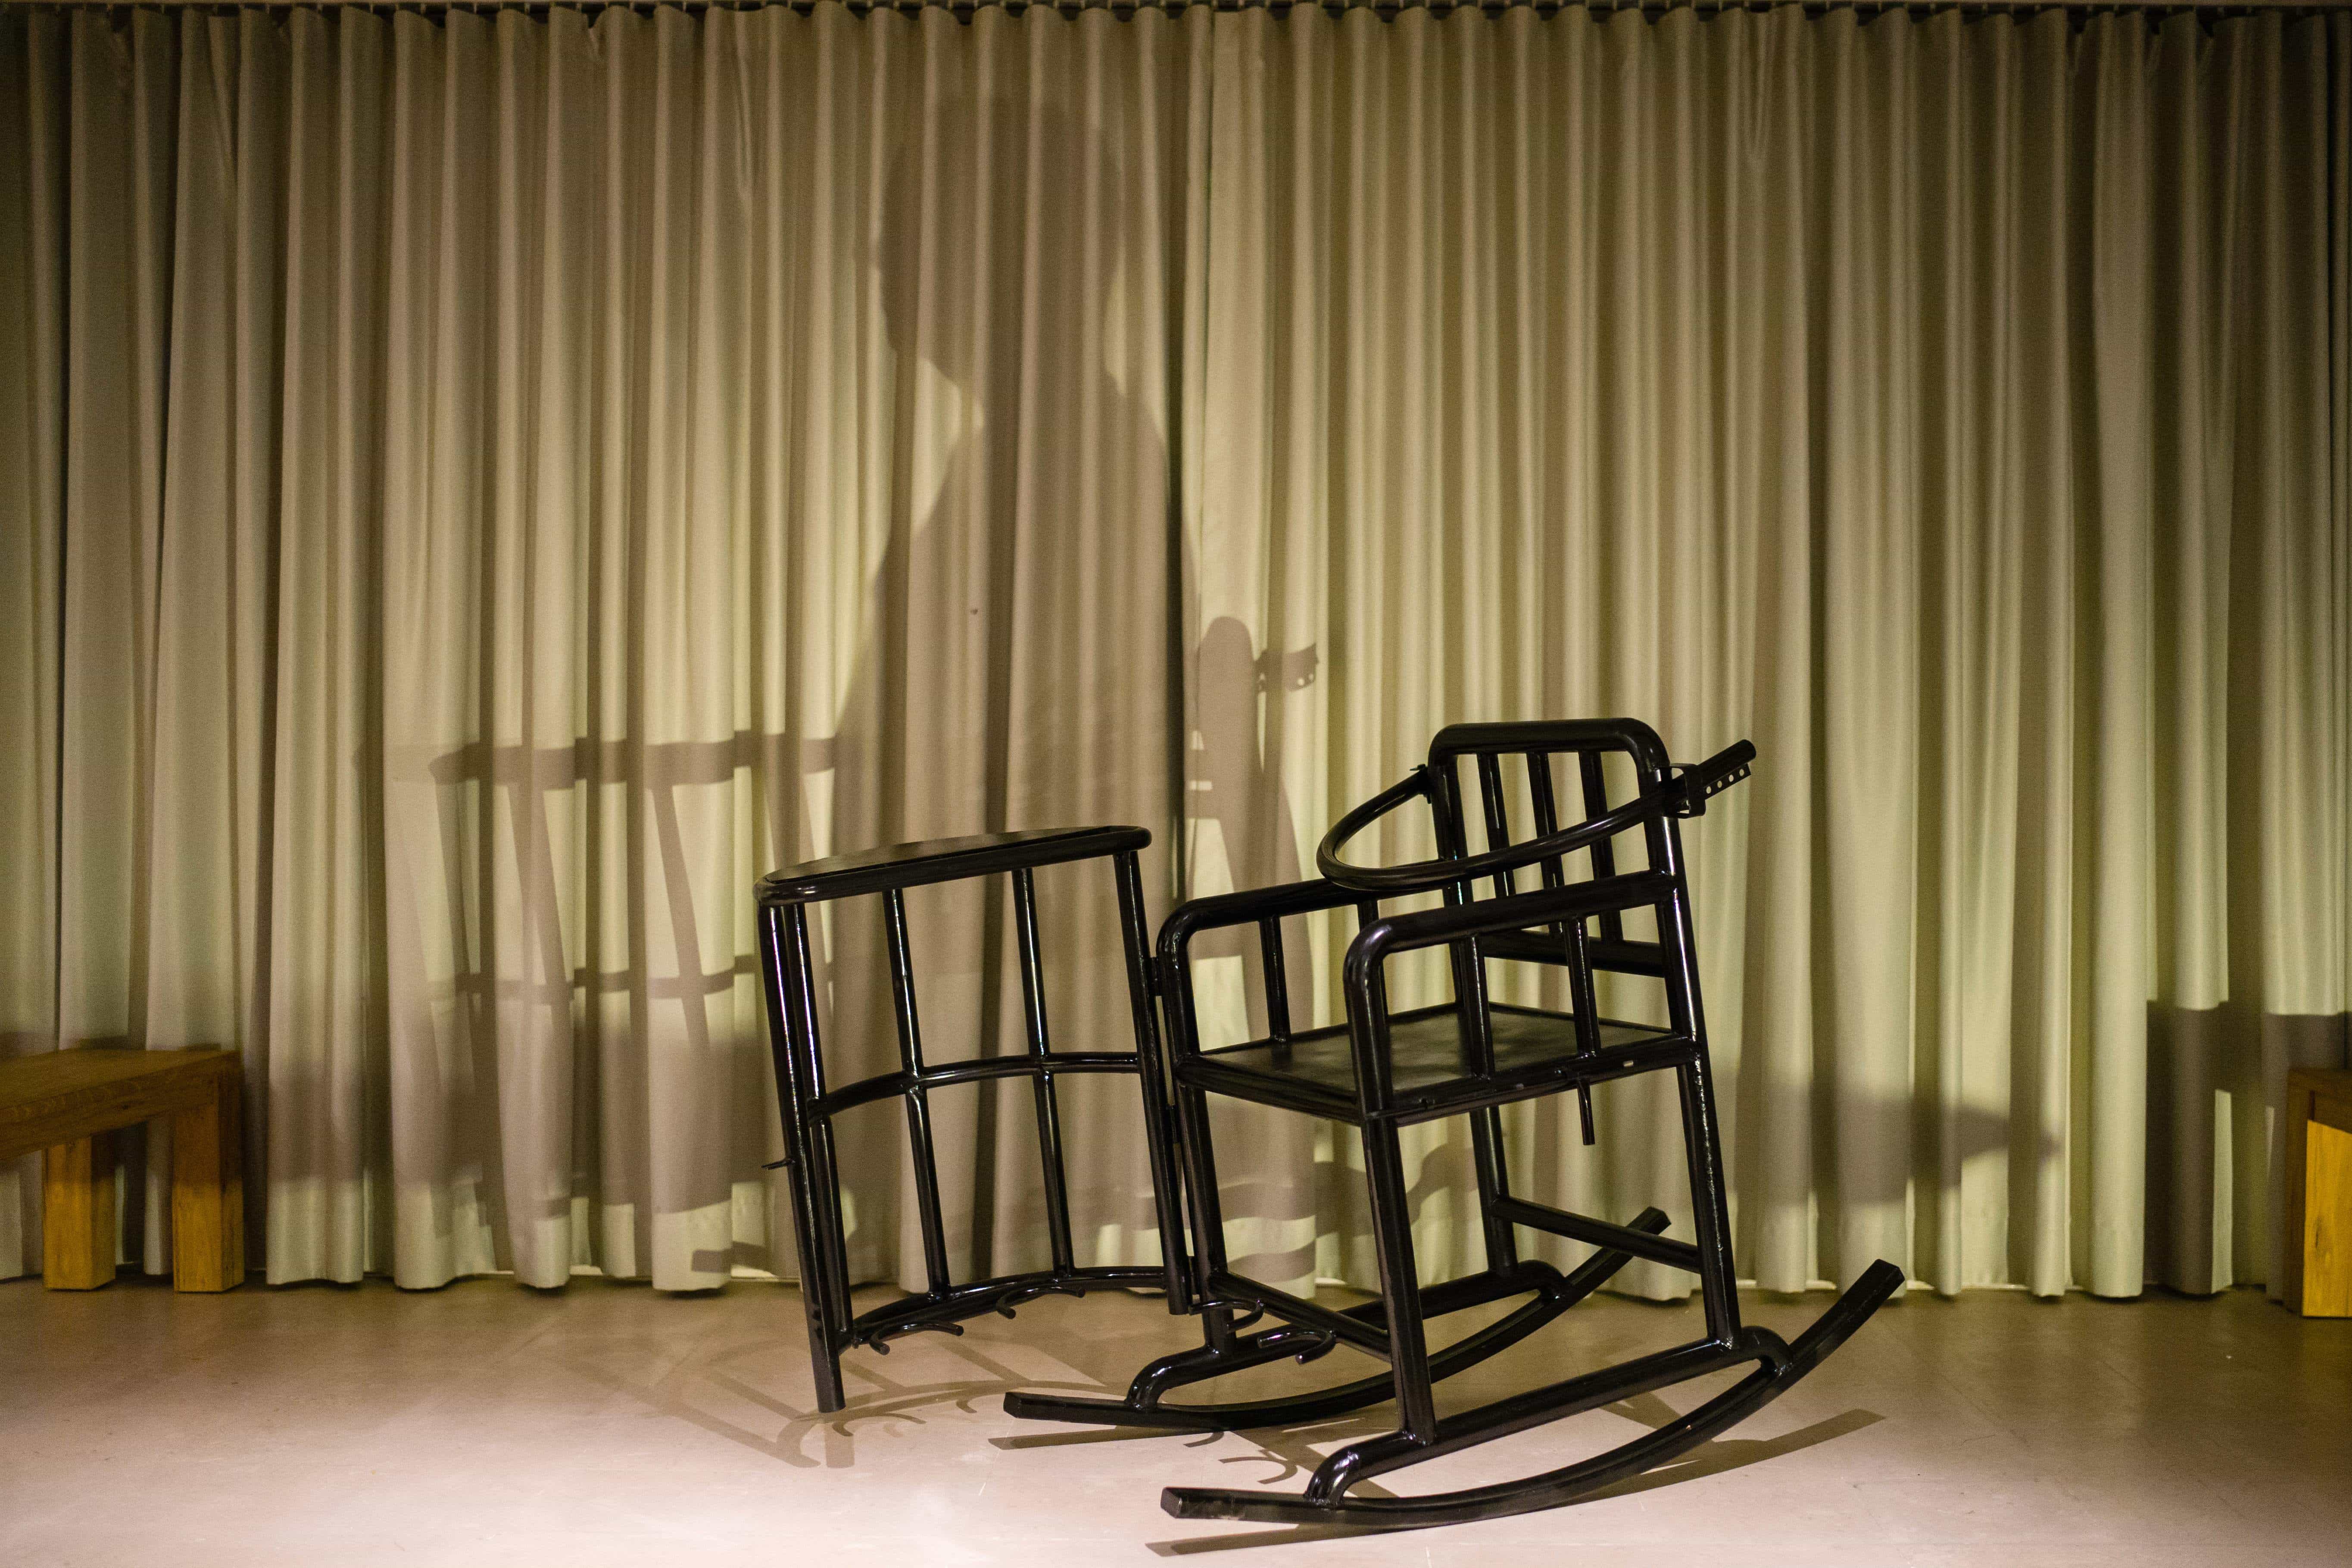 Shadow of political cartoonist Badiucao projected on a 'tiger chair' - used to interrogate detainees - in place of his art show, which was cancelled by authorities, Hong Kong, 2 November 2018, ANTHONY WALLACE/AFP/Getty Images